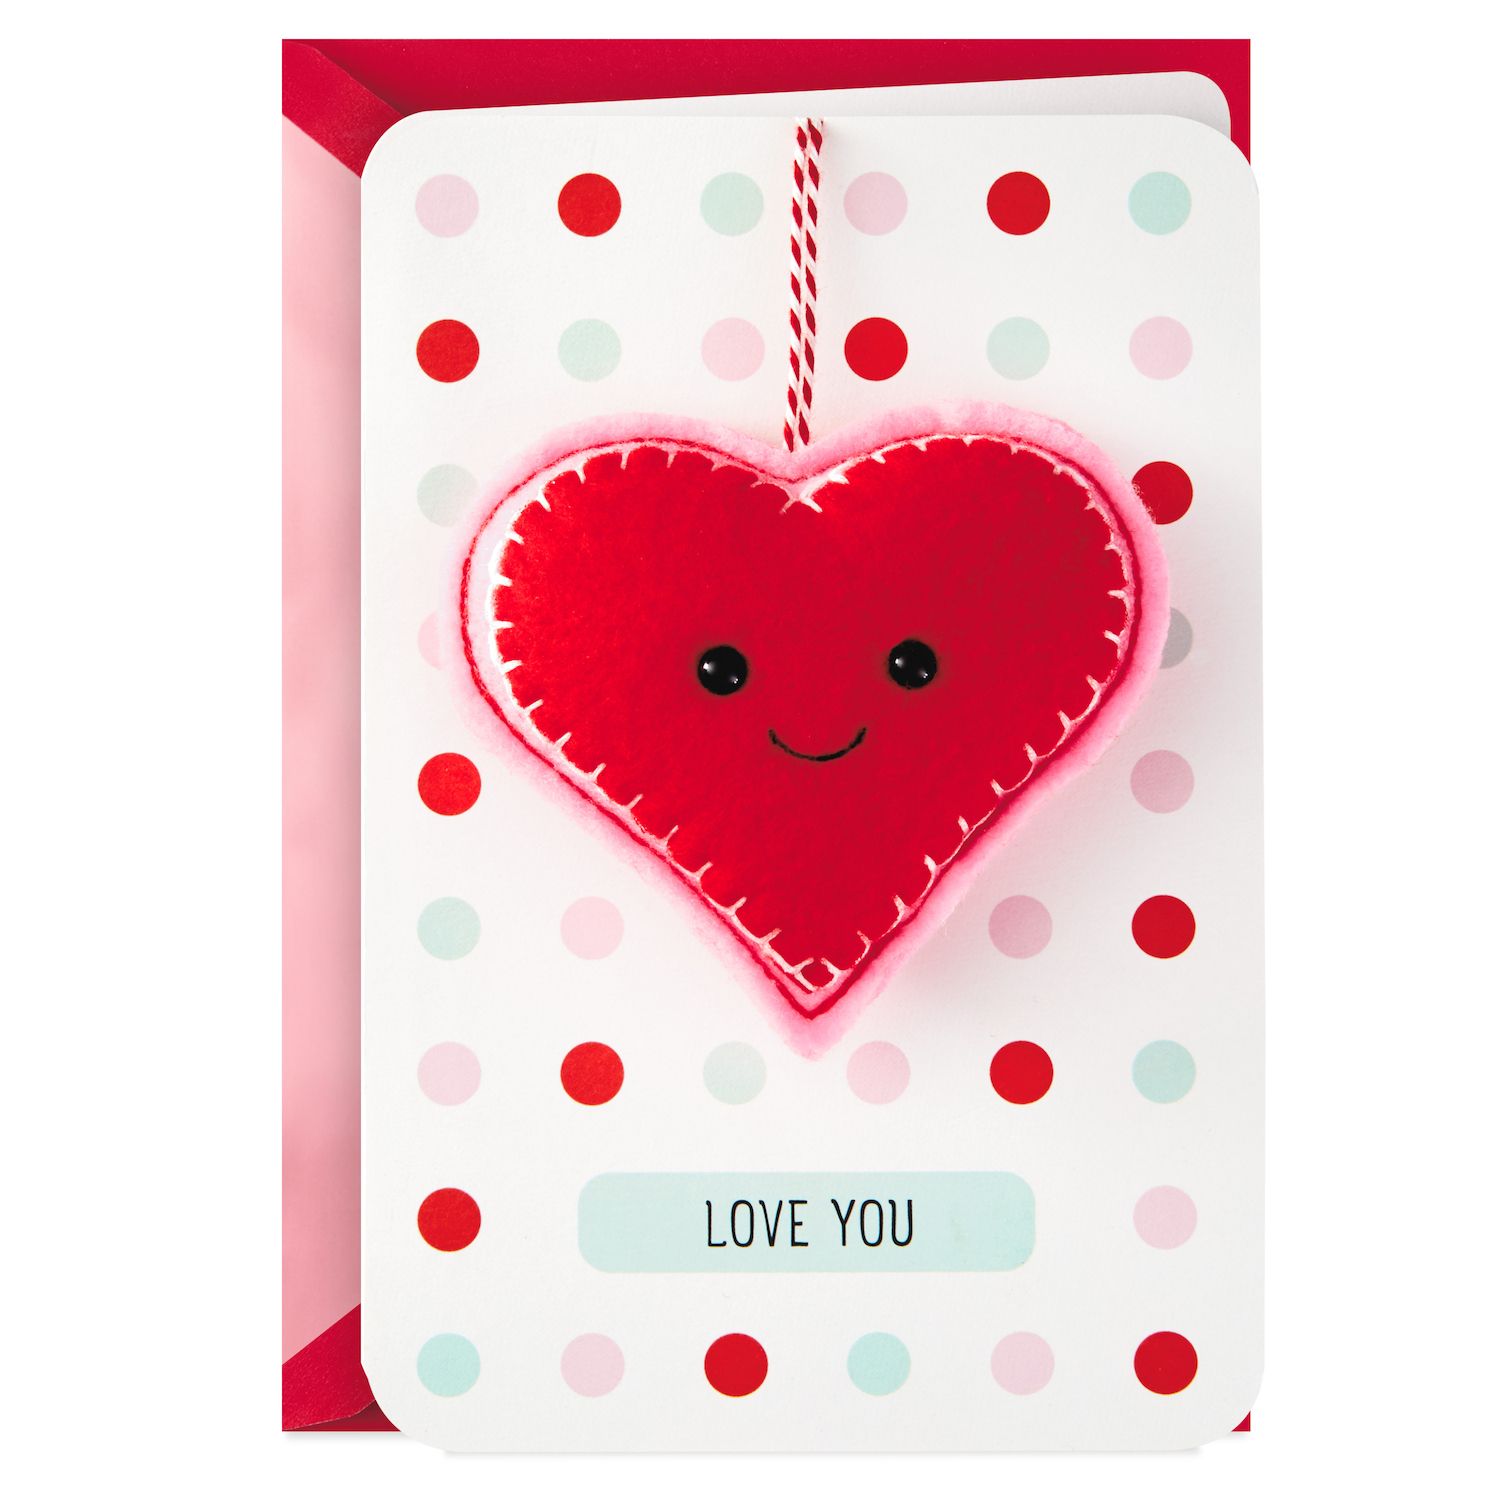 Hallmark Pack of 24 Assorted Valentine's Day Cards - Heart Deco